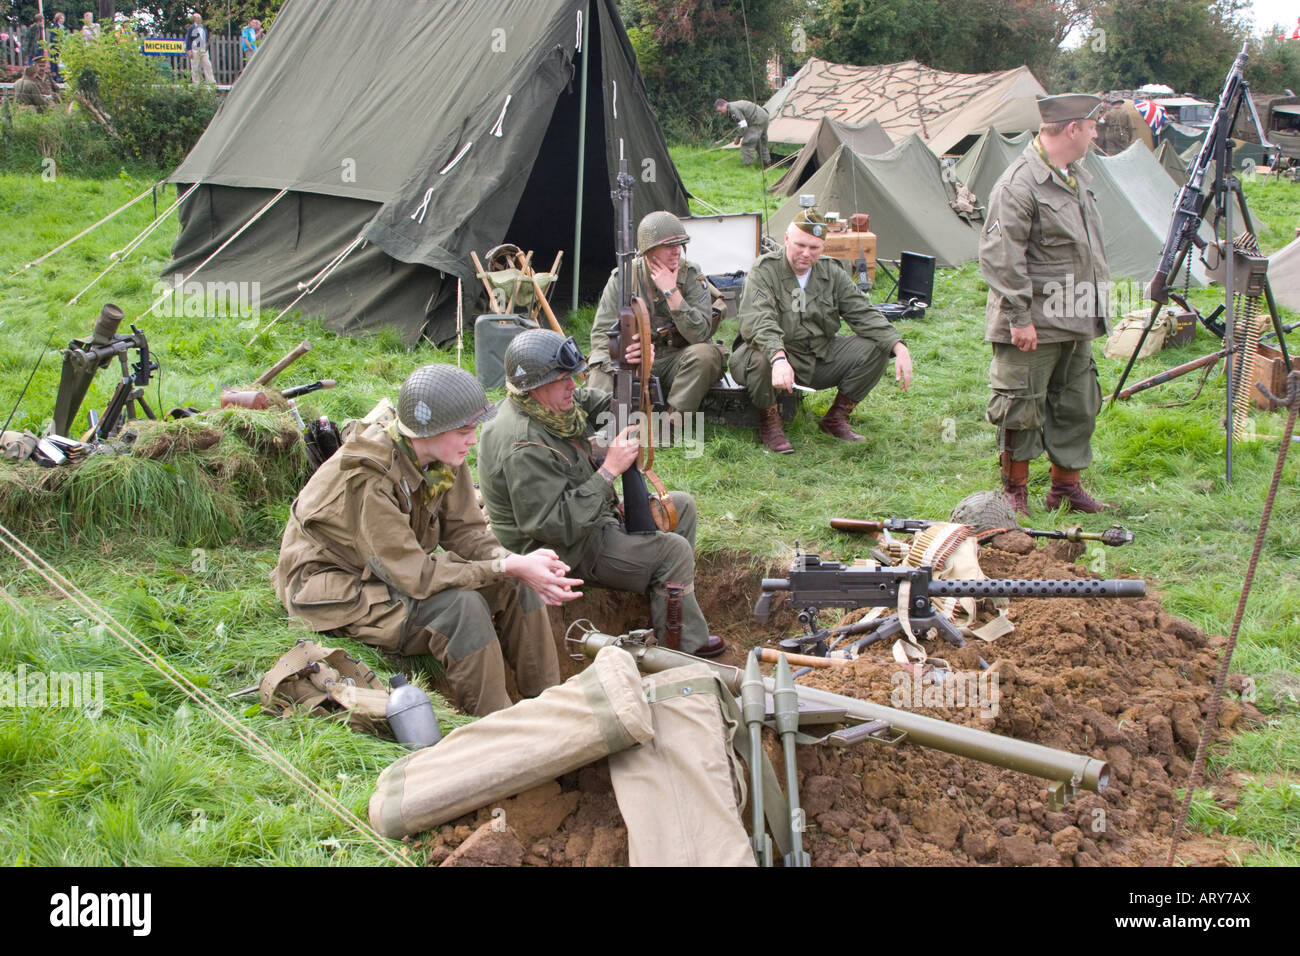 World War II re-enactment soldiers' camp and machine gun emplacement Stock Photo